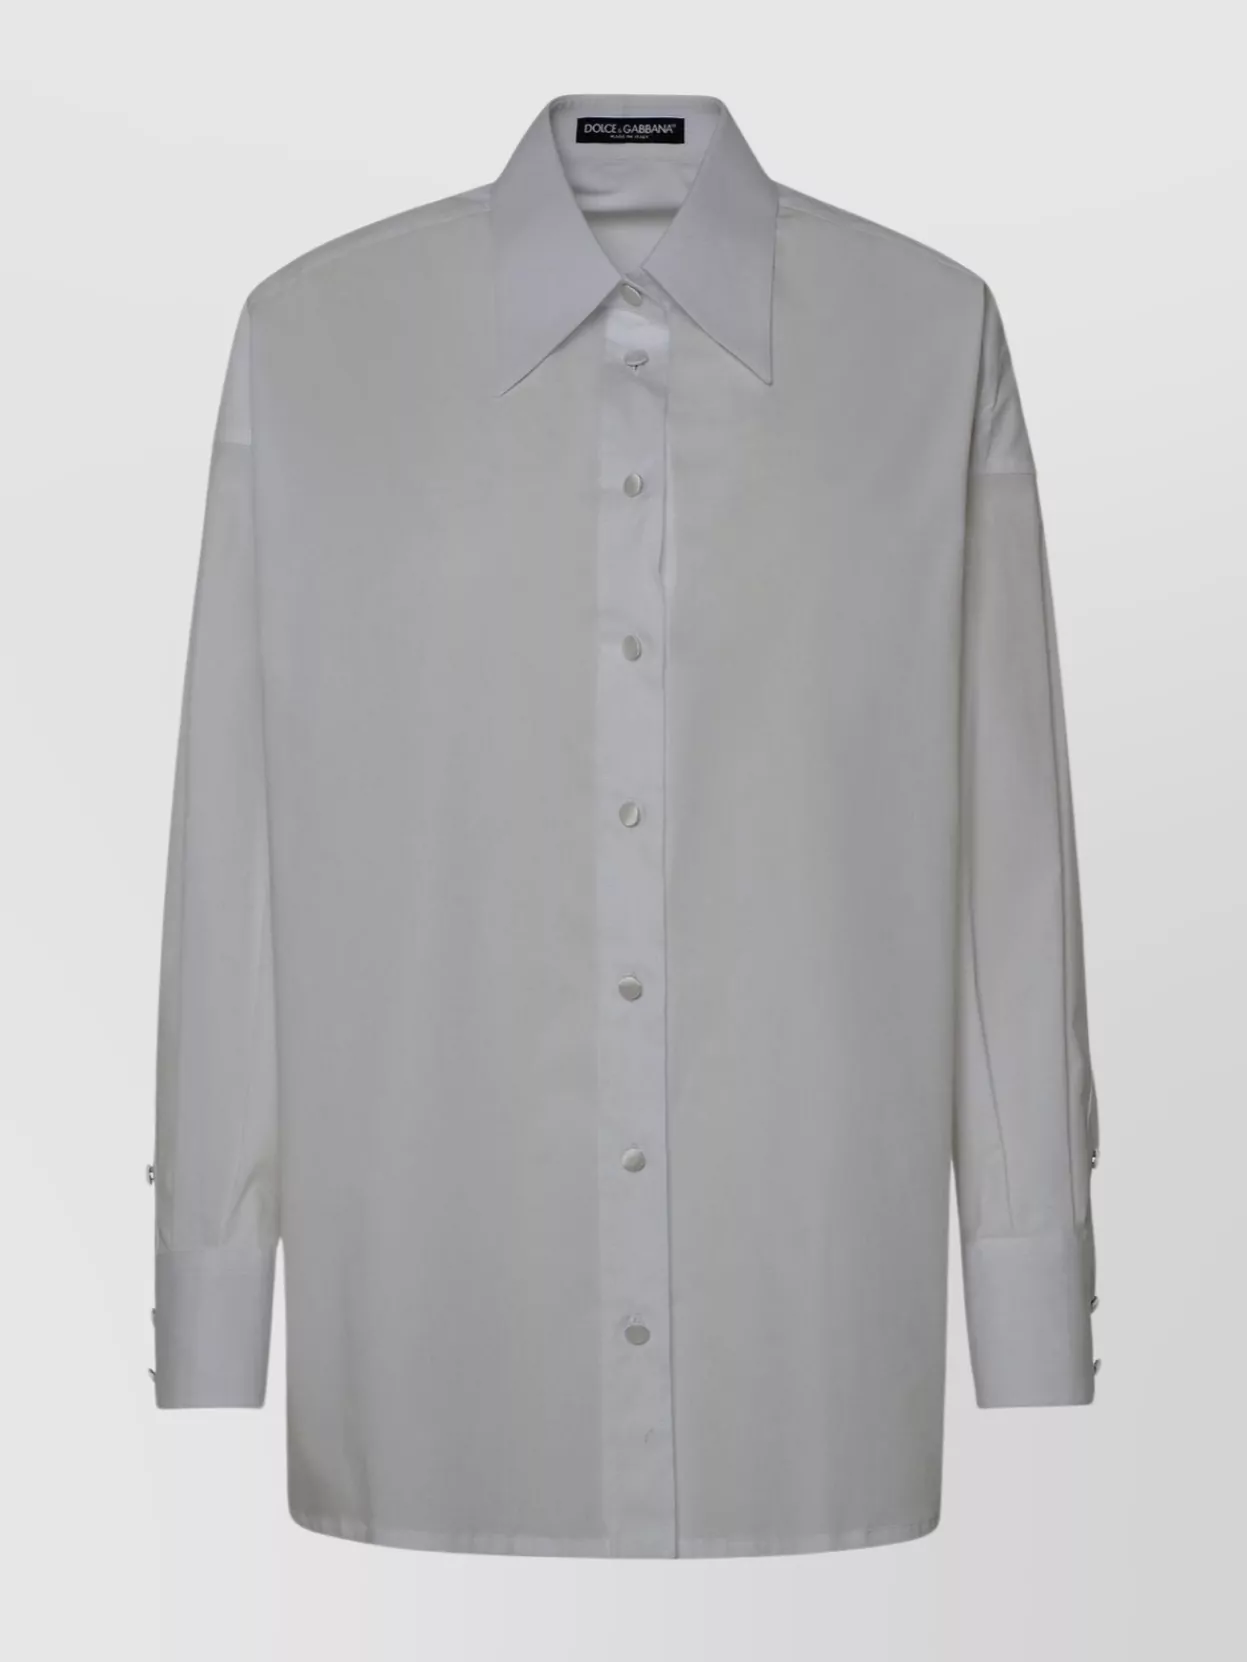 Dolce & Gabbana Cotton Shirt With Point Collar Detail In Gray